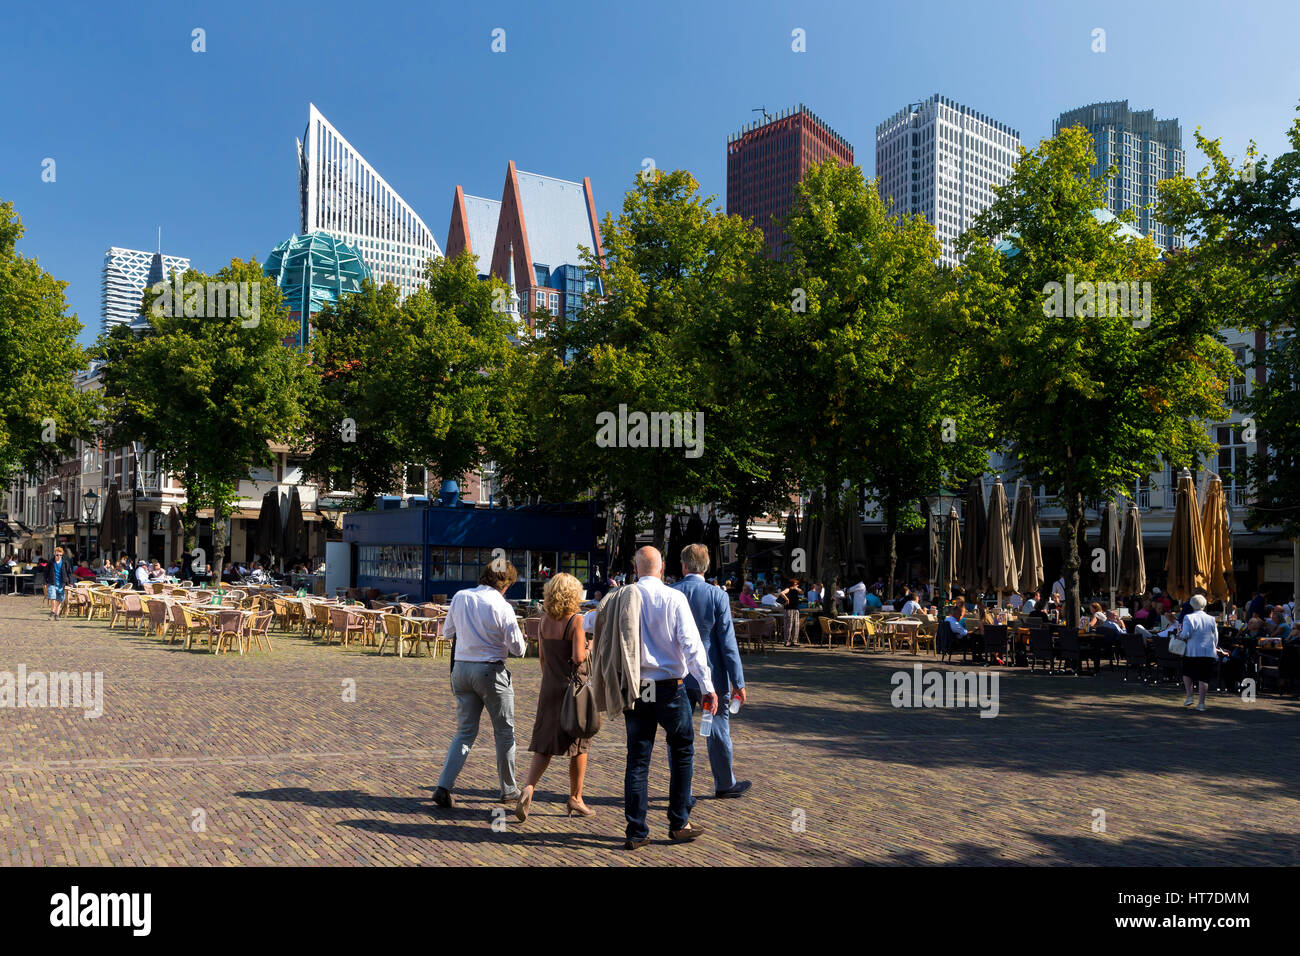 Visitors and tourists in Square Het Plein with Skyscrapers behind, city centre, The Hague, Netherlands, Europe Stock Photo